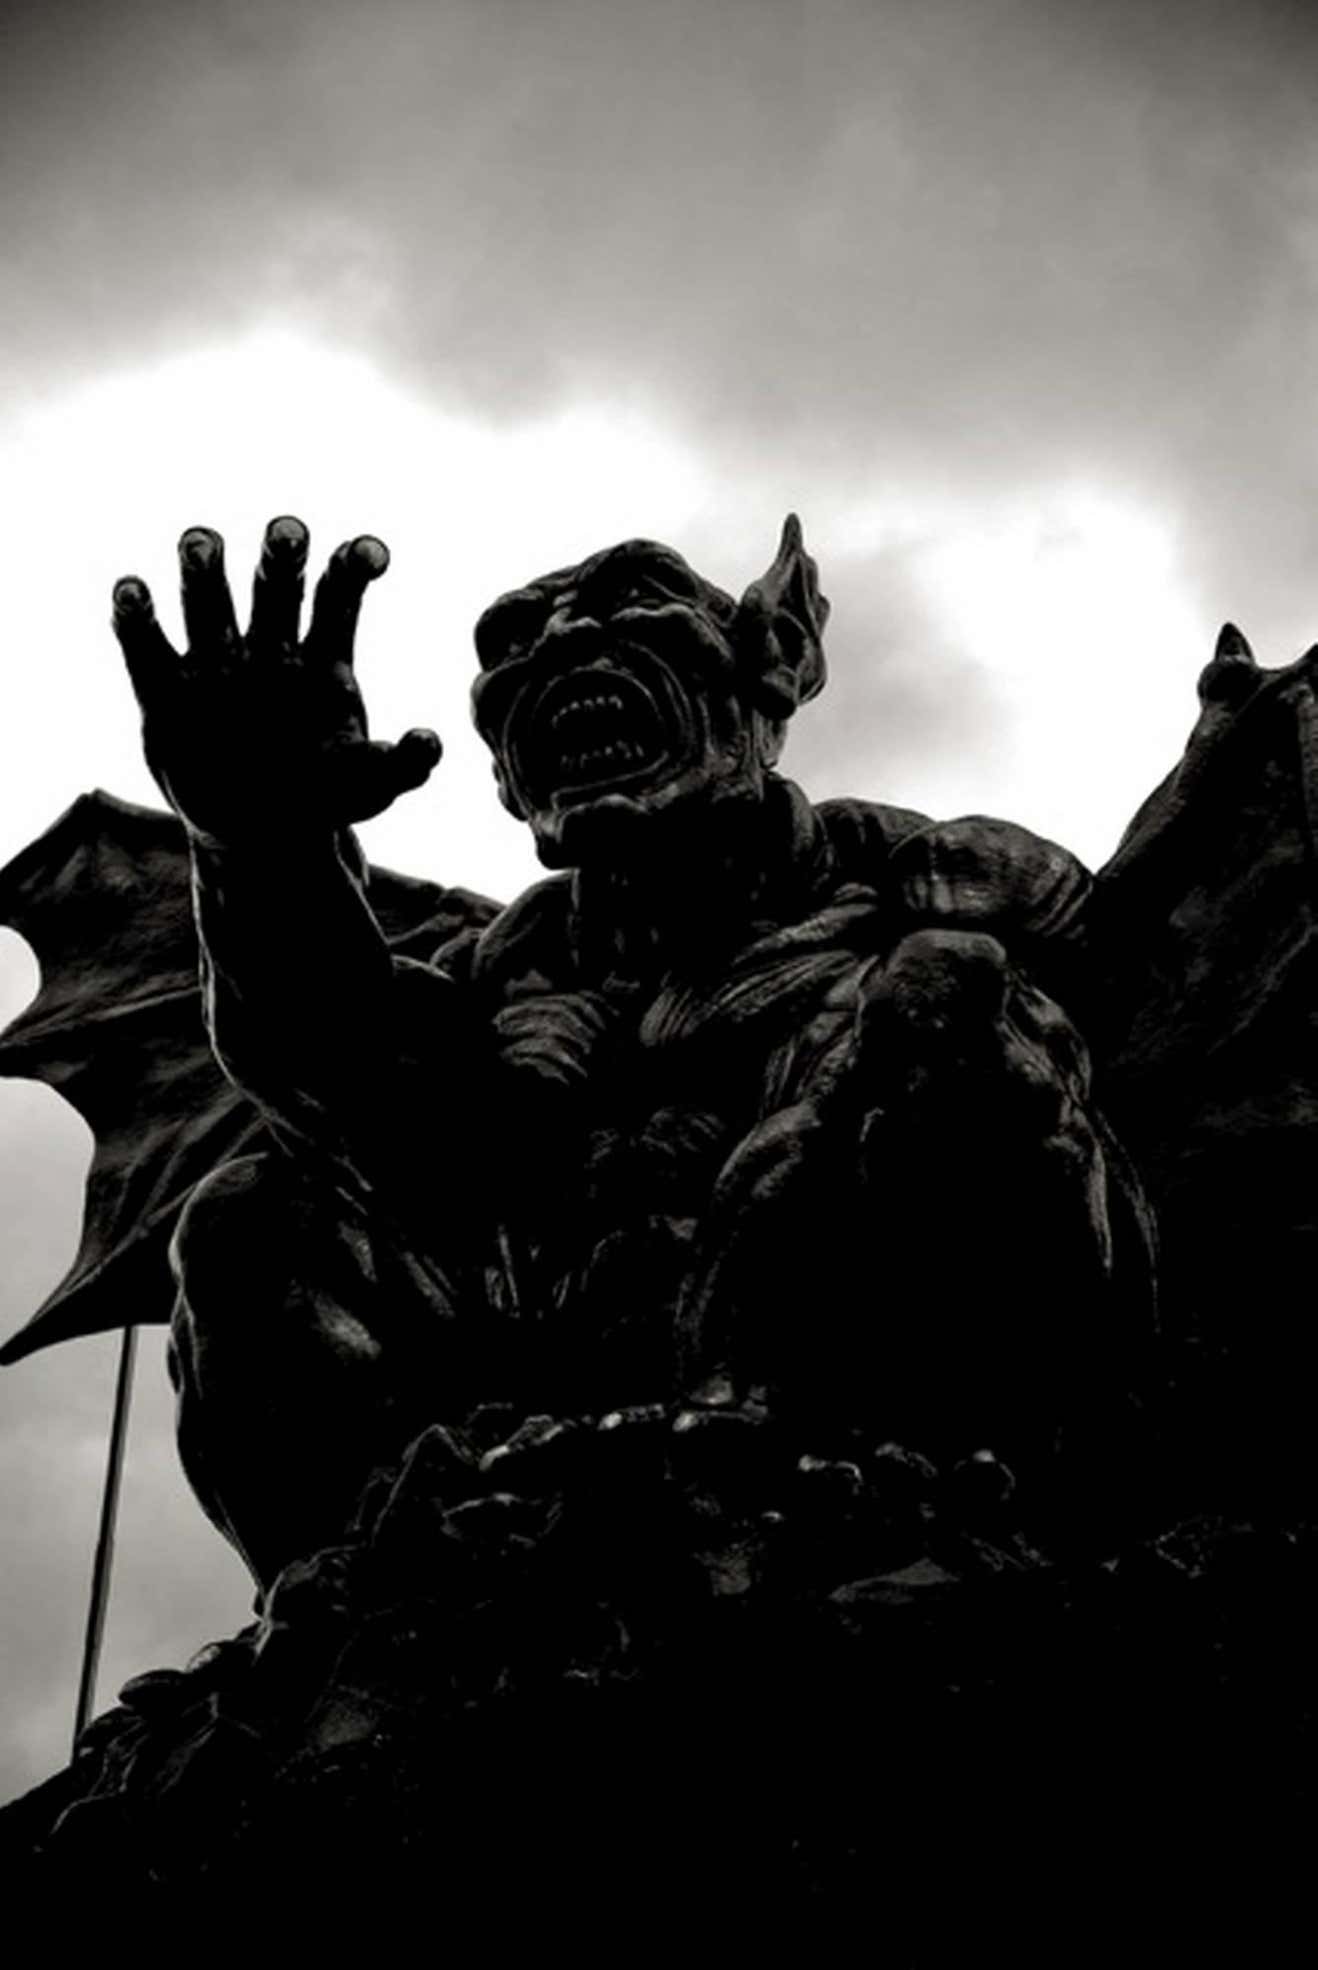 Deeper Shades of Vienna 9 by Andreas H. Bitesnich, black and white, high contrast picture of a gargoyle figure in the viennese prater